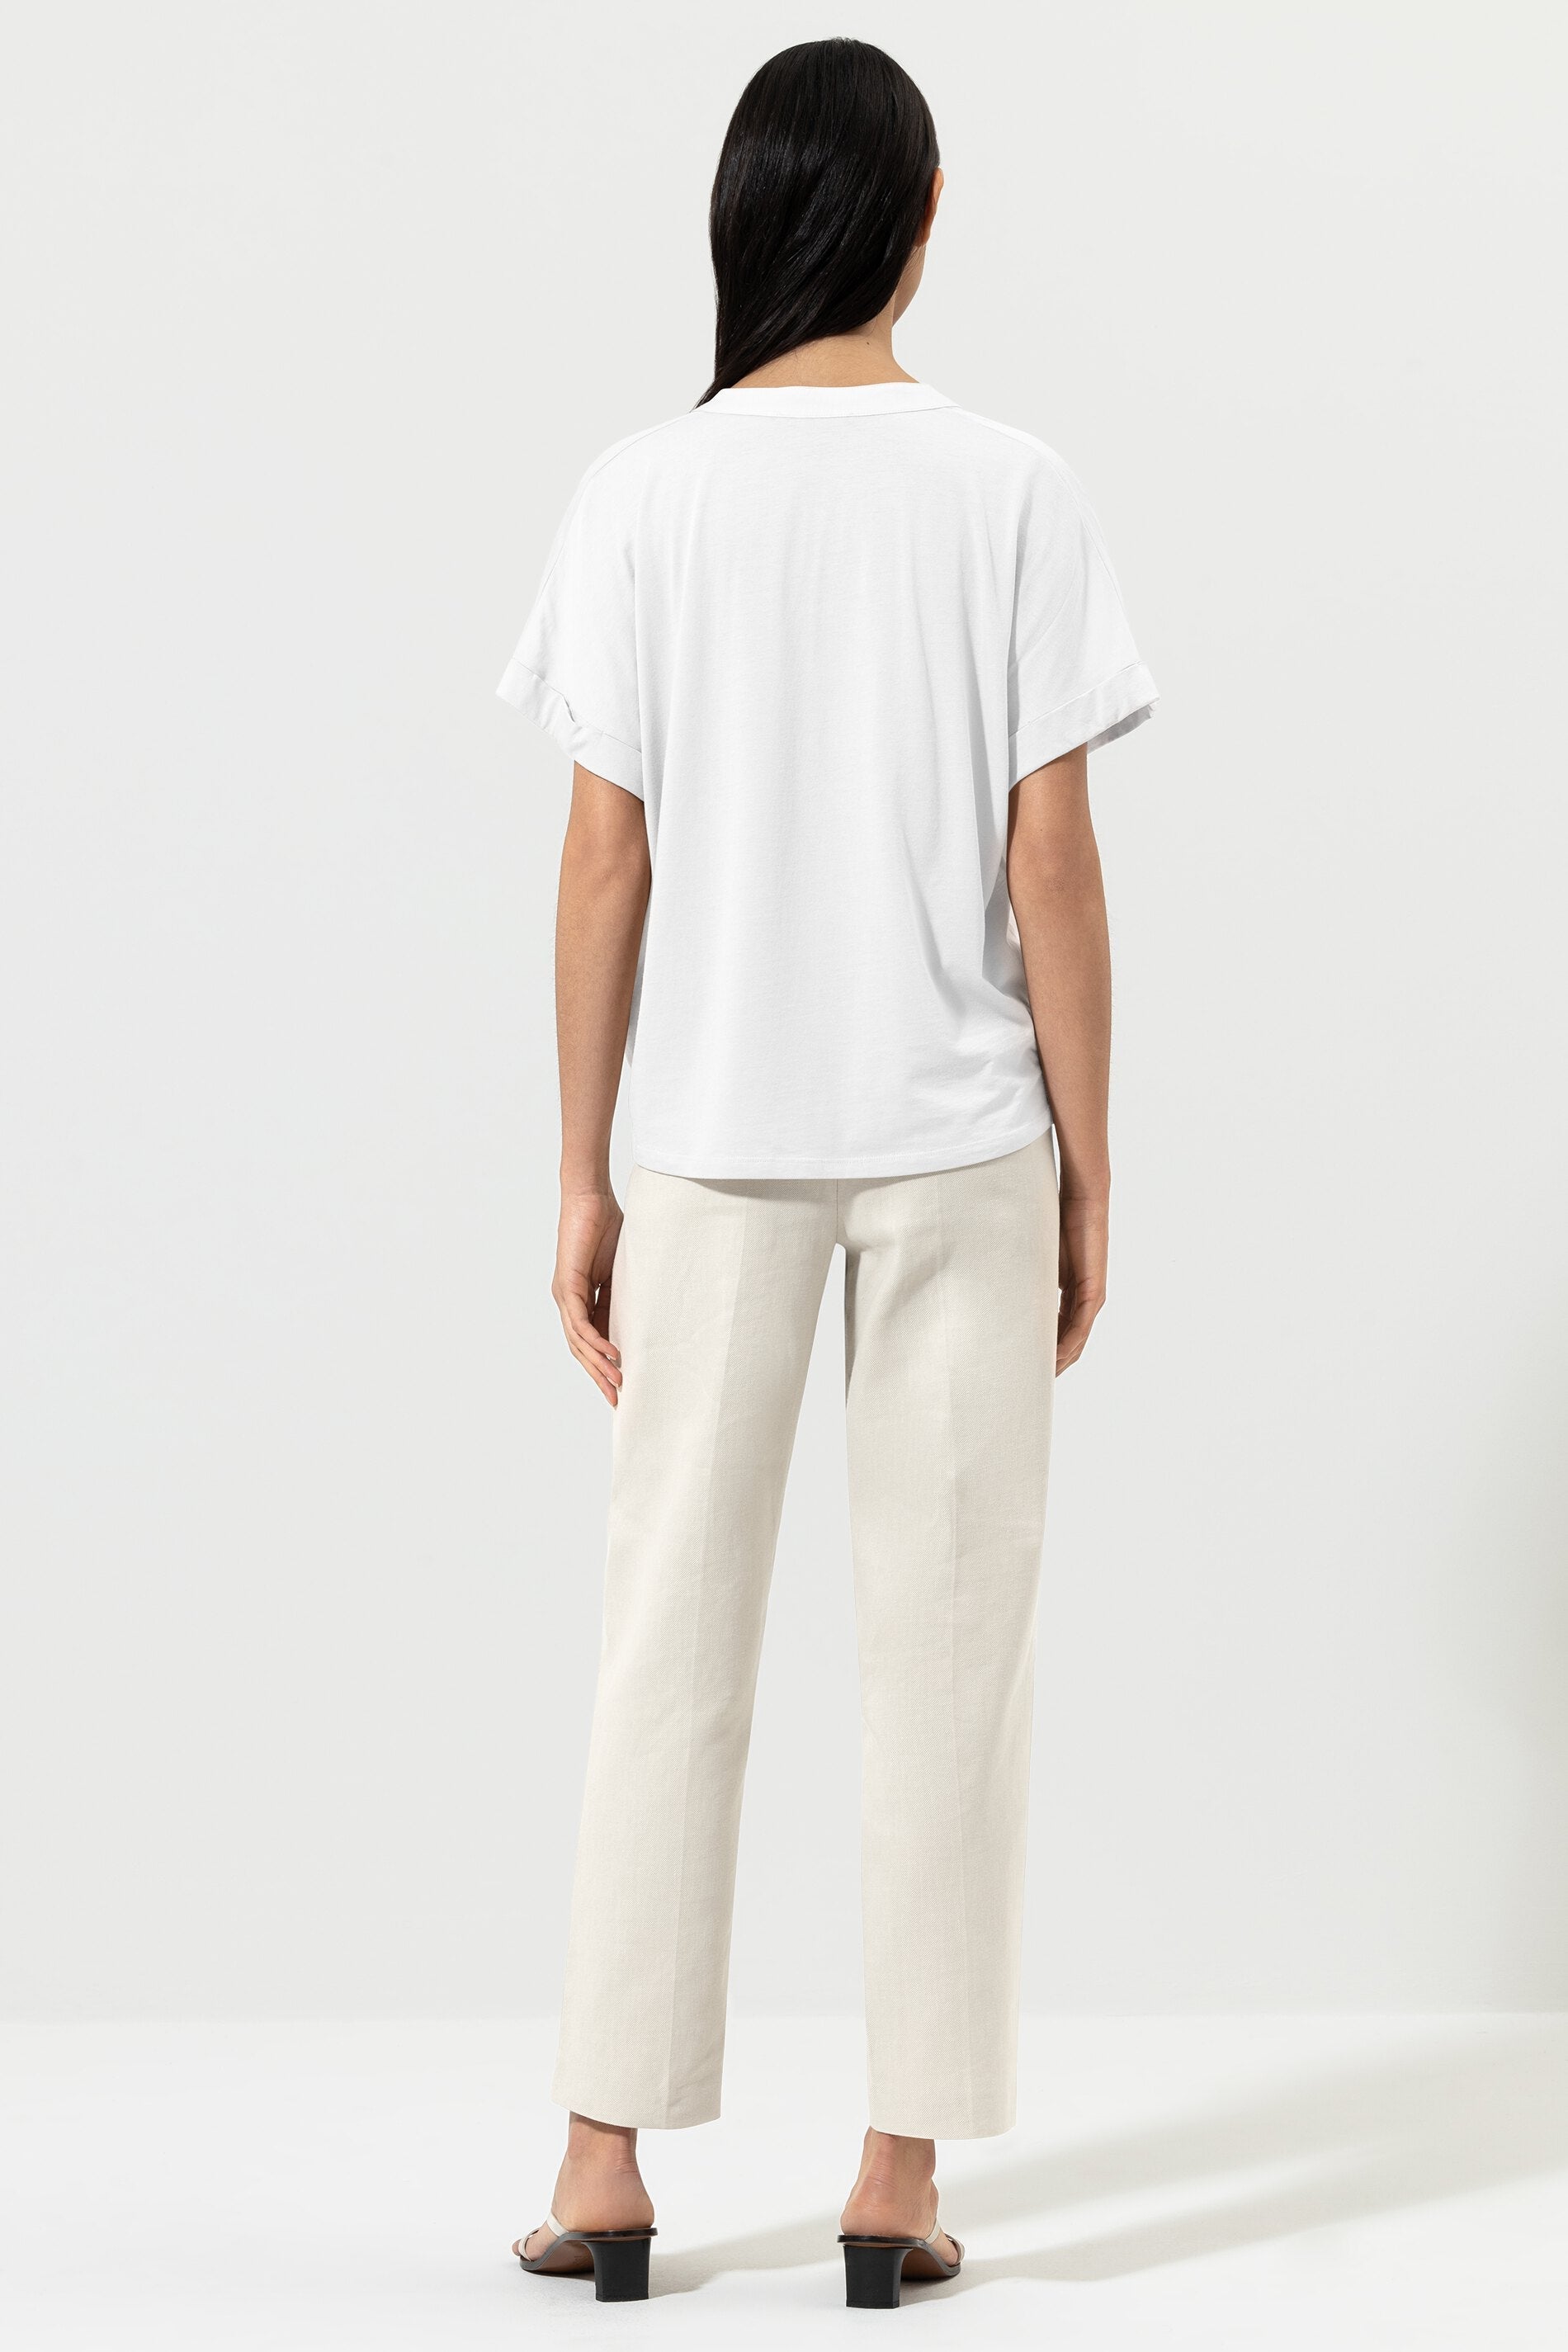 LUISA-CERANO-OUTLET-SALE-Tapered-Pants-aus-Leinen-Mix-Hosen-ARCHIVE-COLLECTION-3.jpg